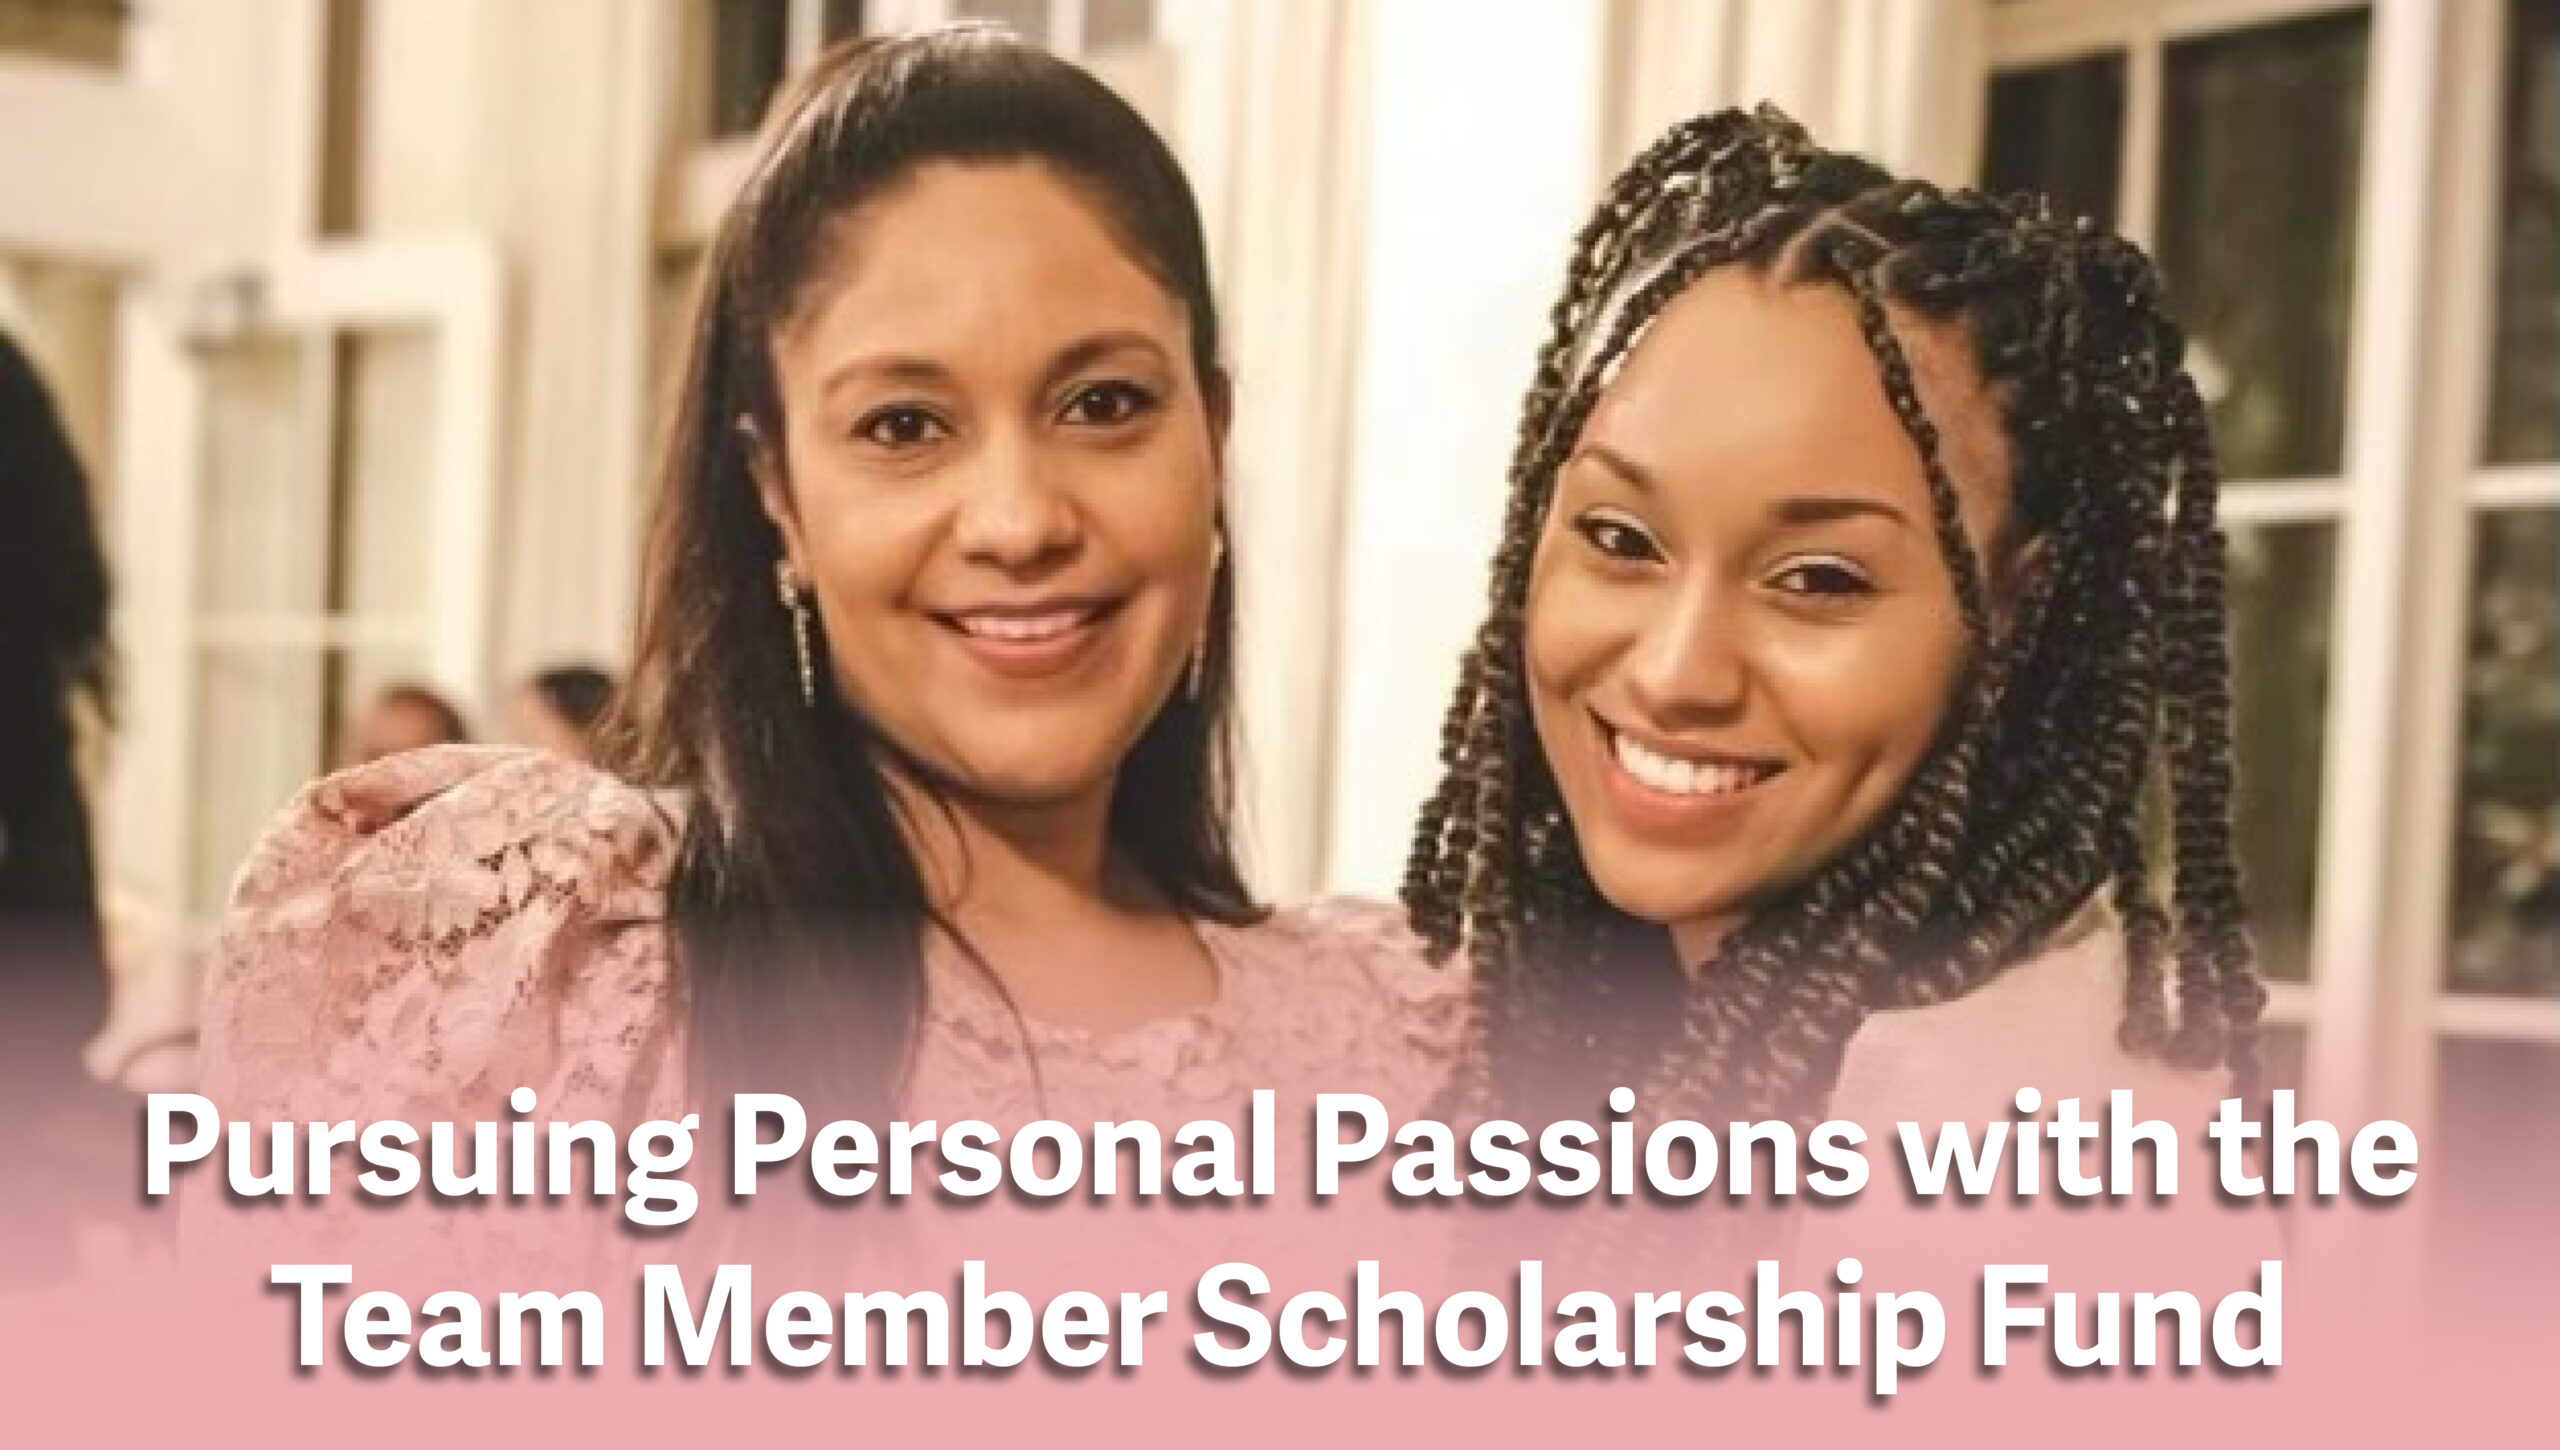 Pursuing Personal Passions with the Team Member Scholarship Fund